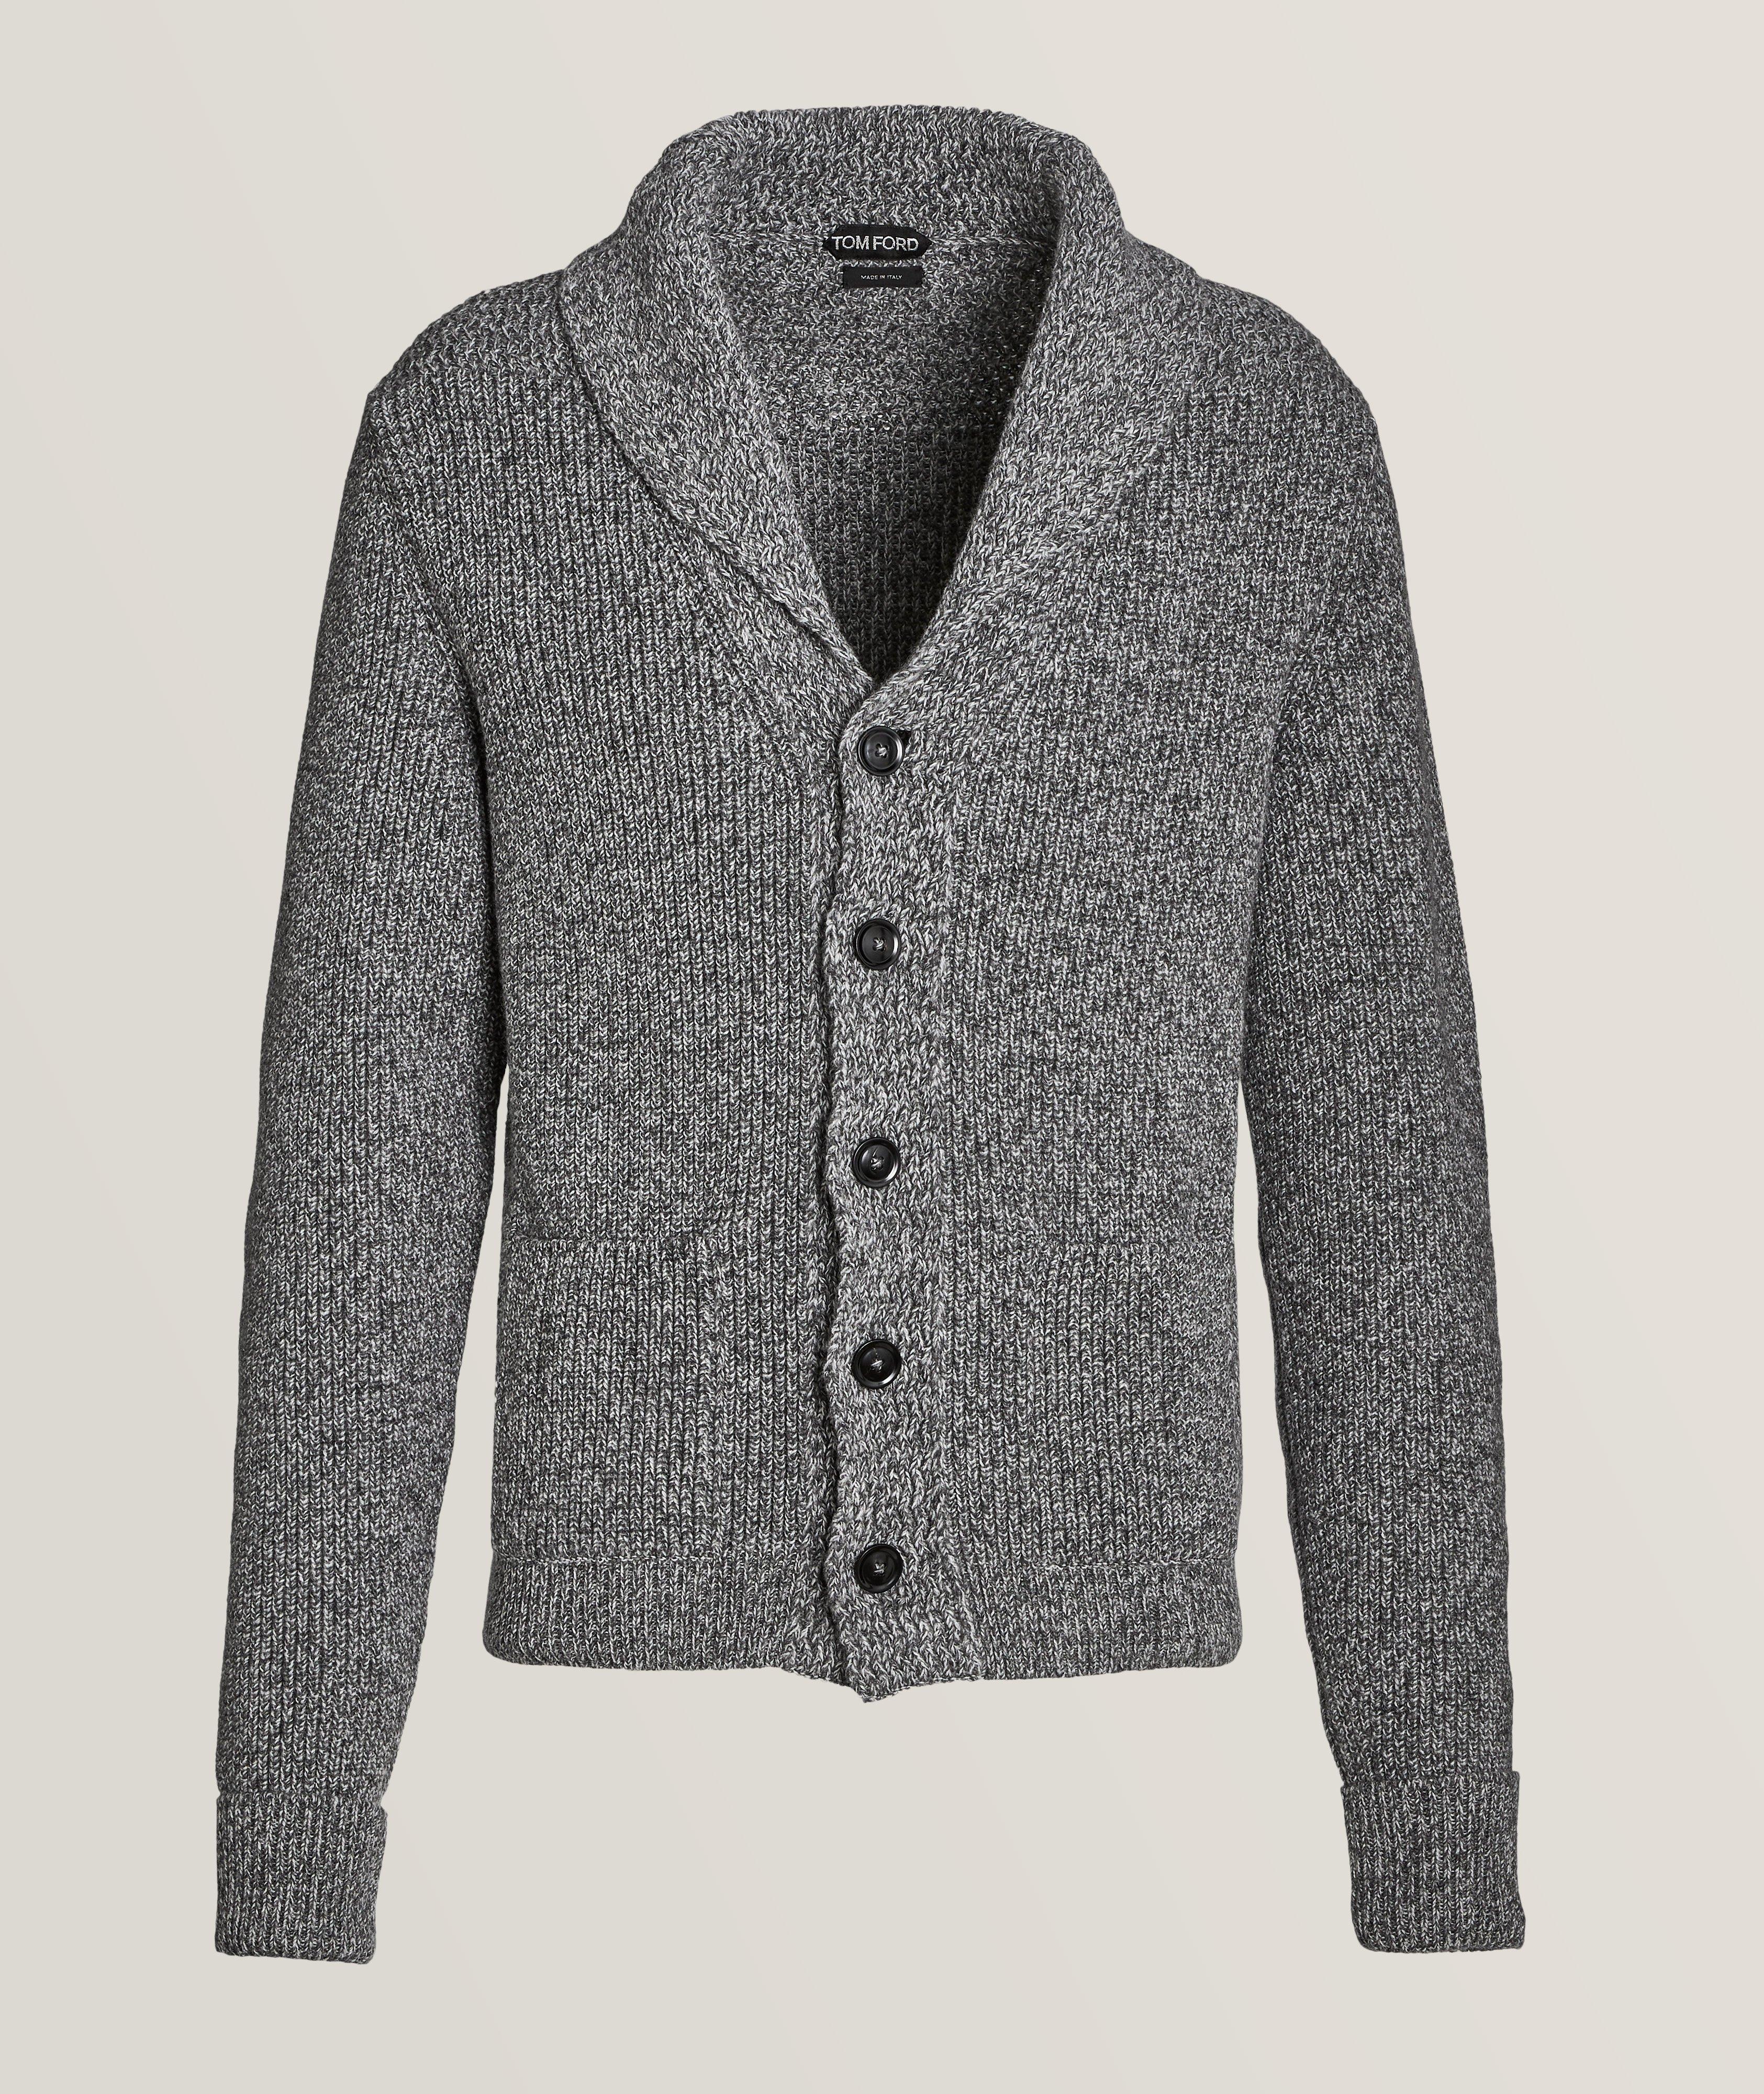 TOM FORD Mélange Cashmere Knitted Cardigan 